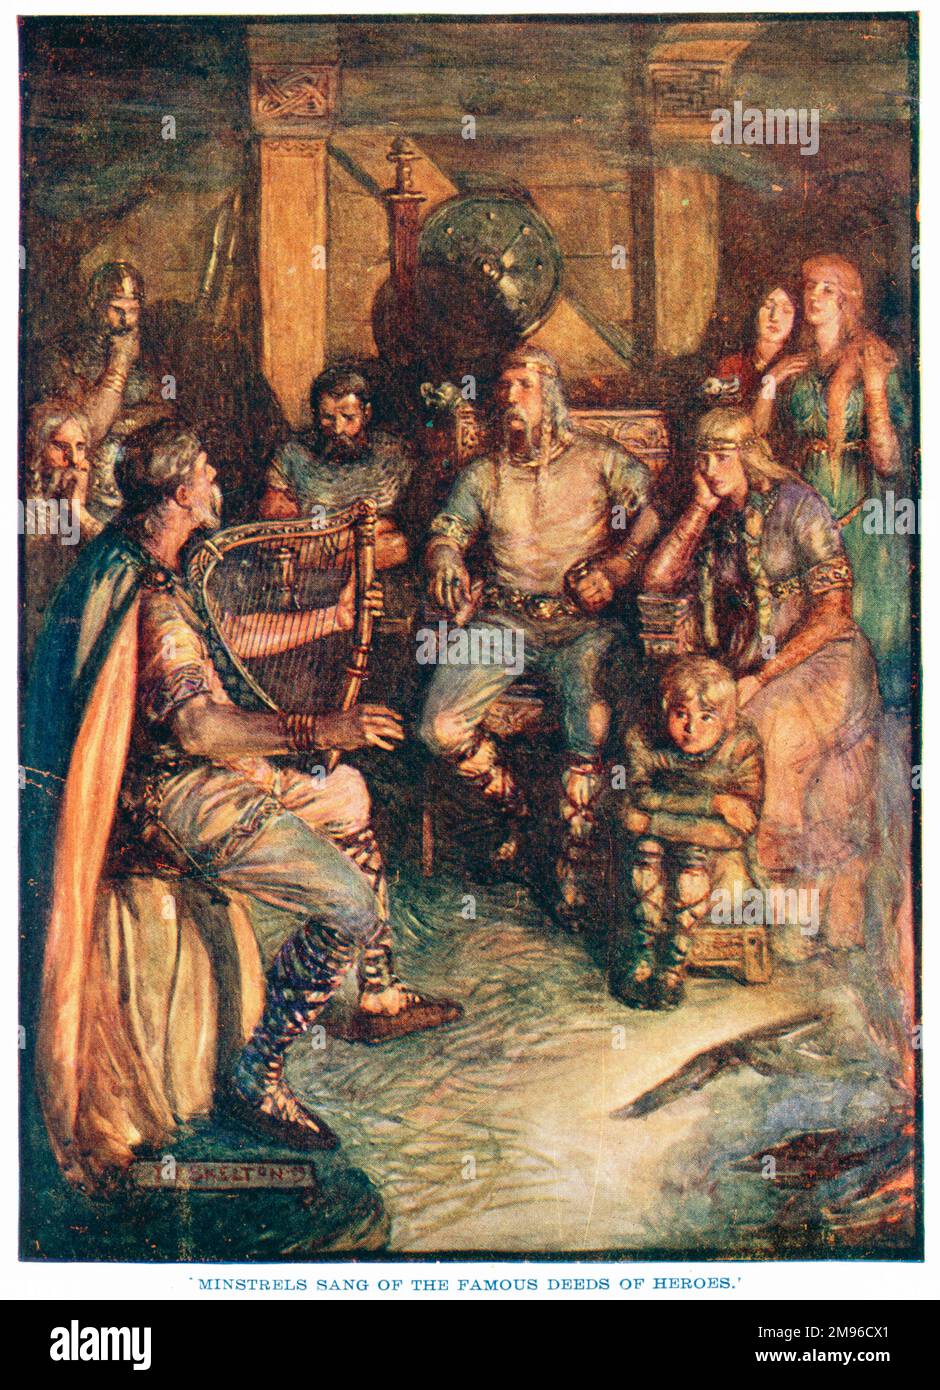 'Minstrels sang of the famous deeds of heroes.'  A medieval minstrel with a celtic harp sings stories to a rapt audience of men, women and children. Stock Photo